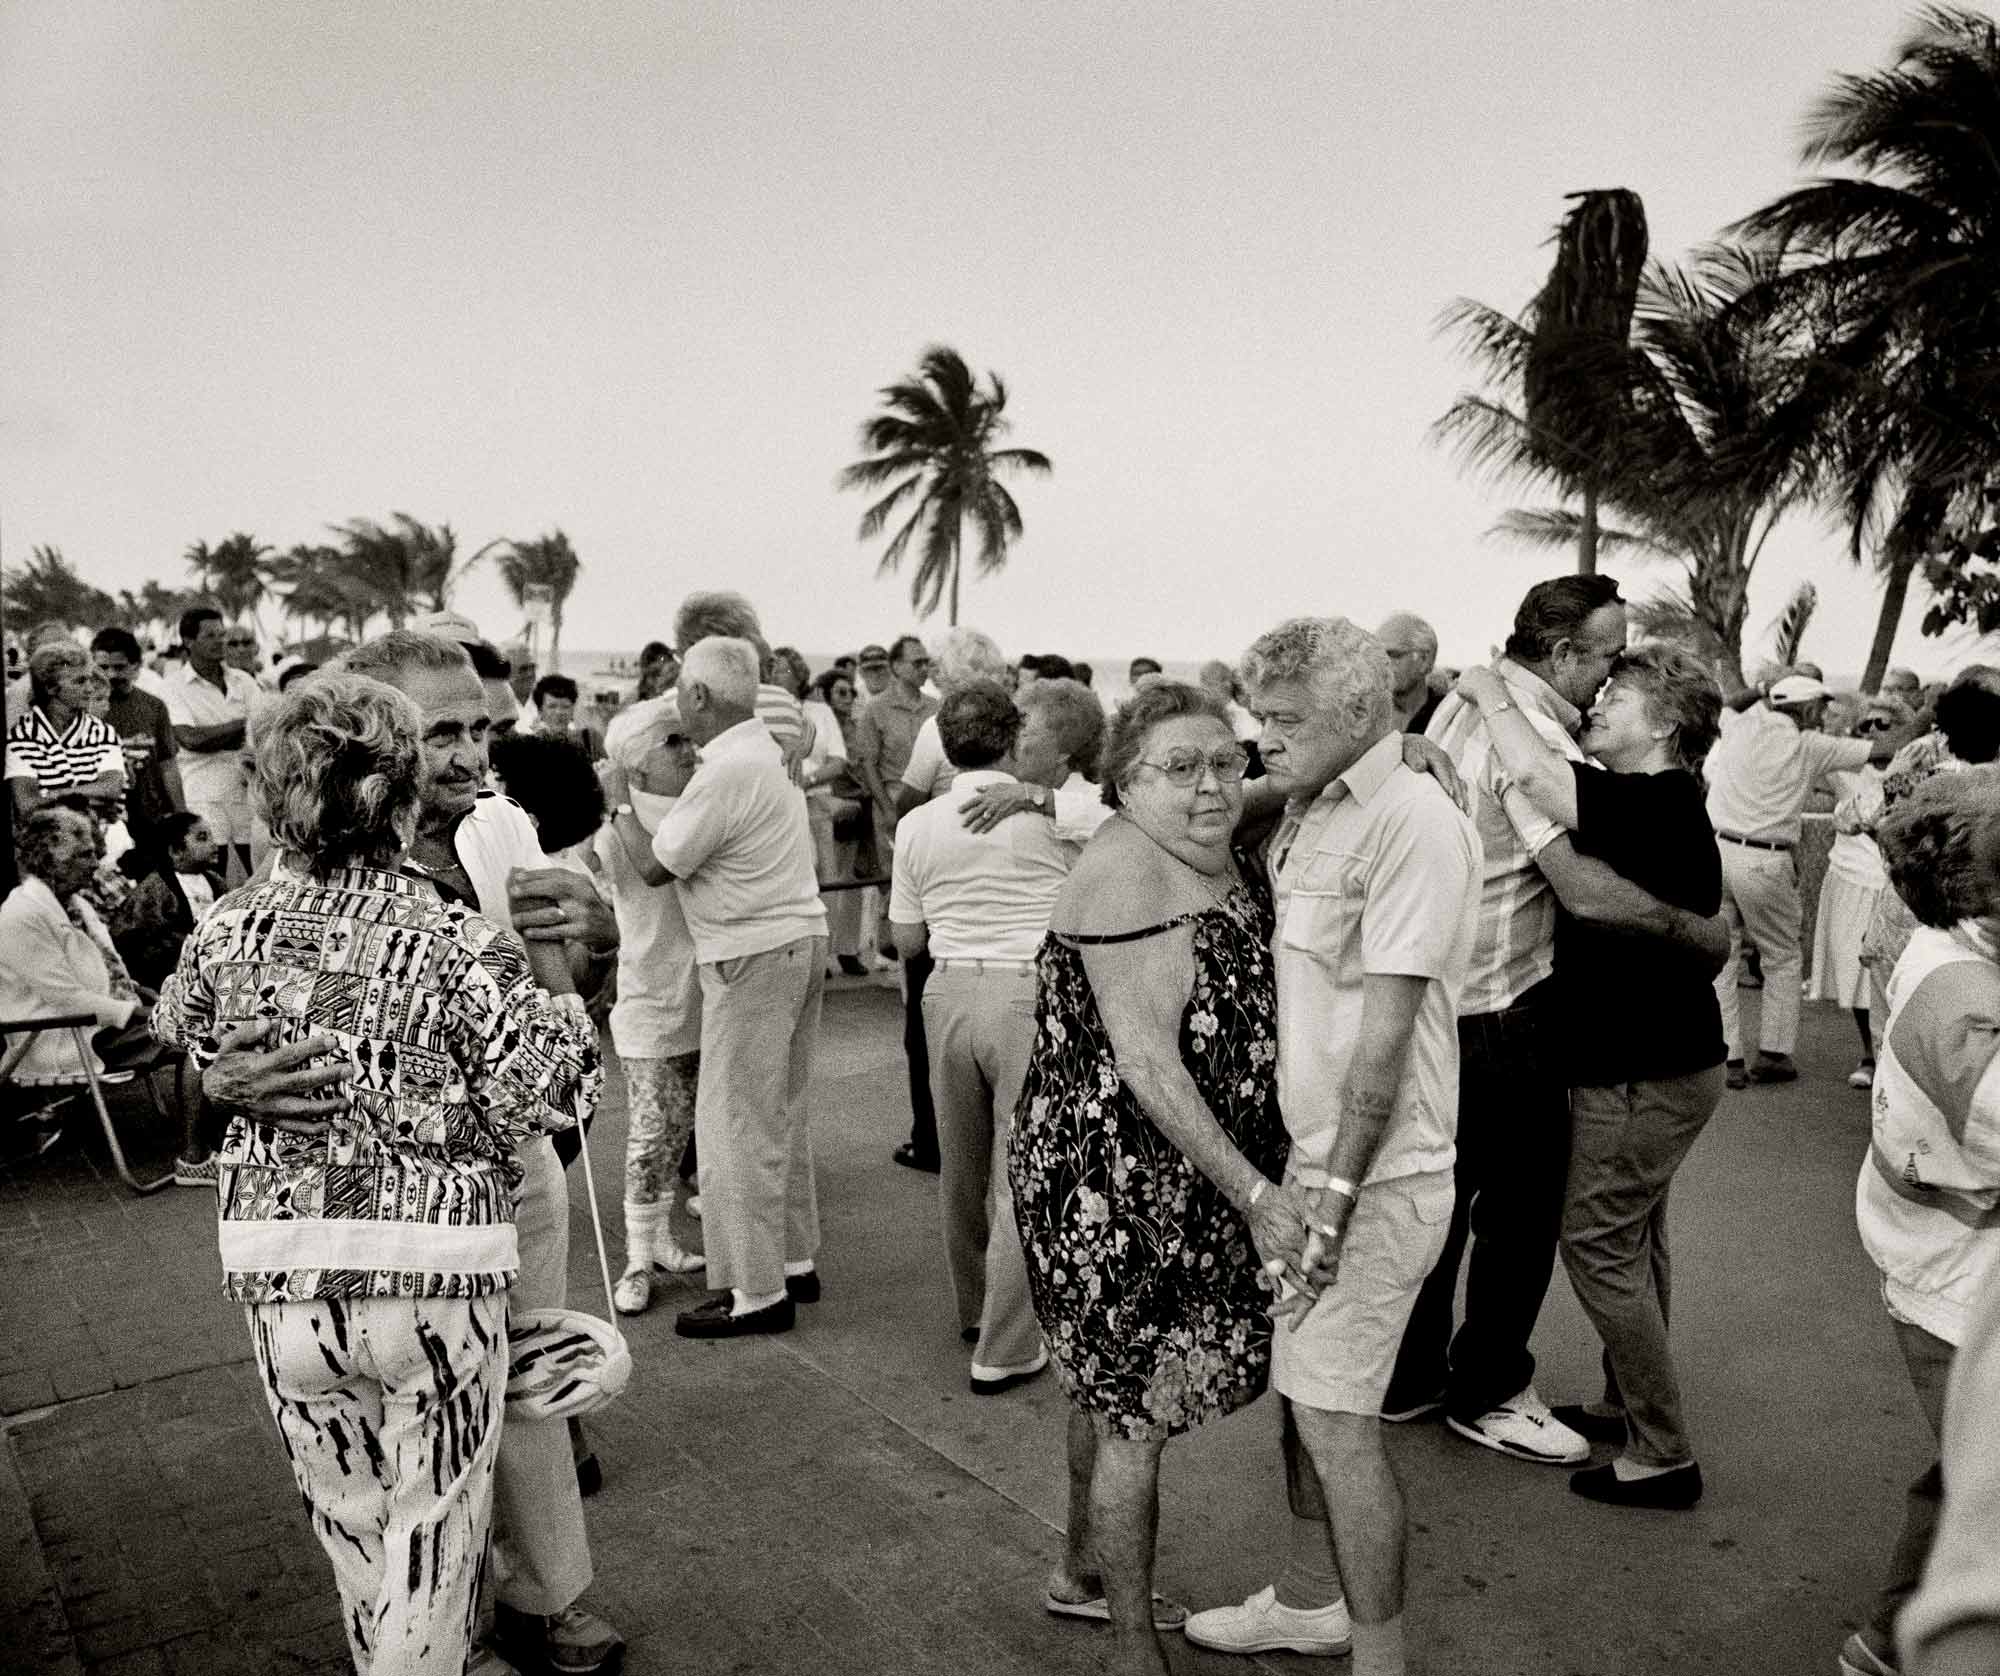 Miami Beach - Miami Beach, Captured In Its Hedonistic Heyday